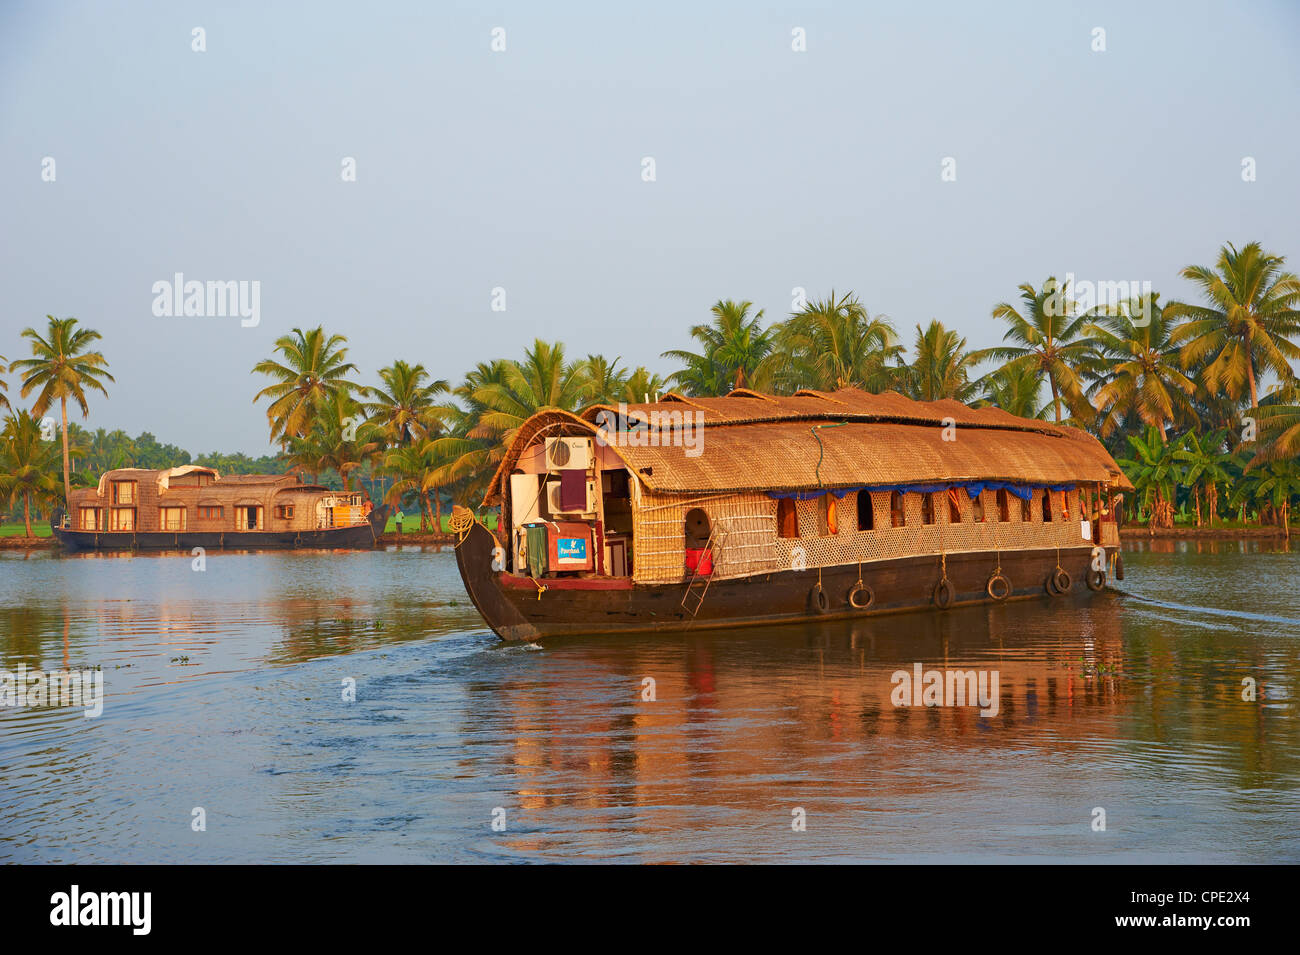 Houseboat for tourists on the backwaters, Allepey, Kerala, India, Asia Stock Photo